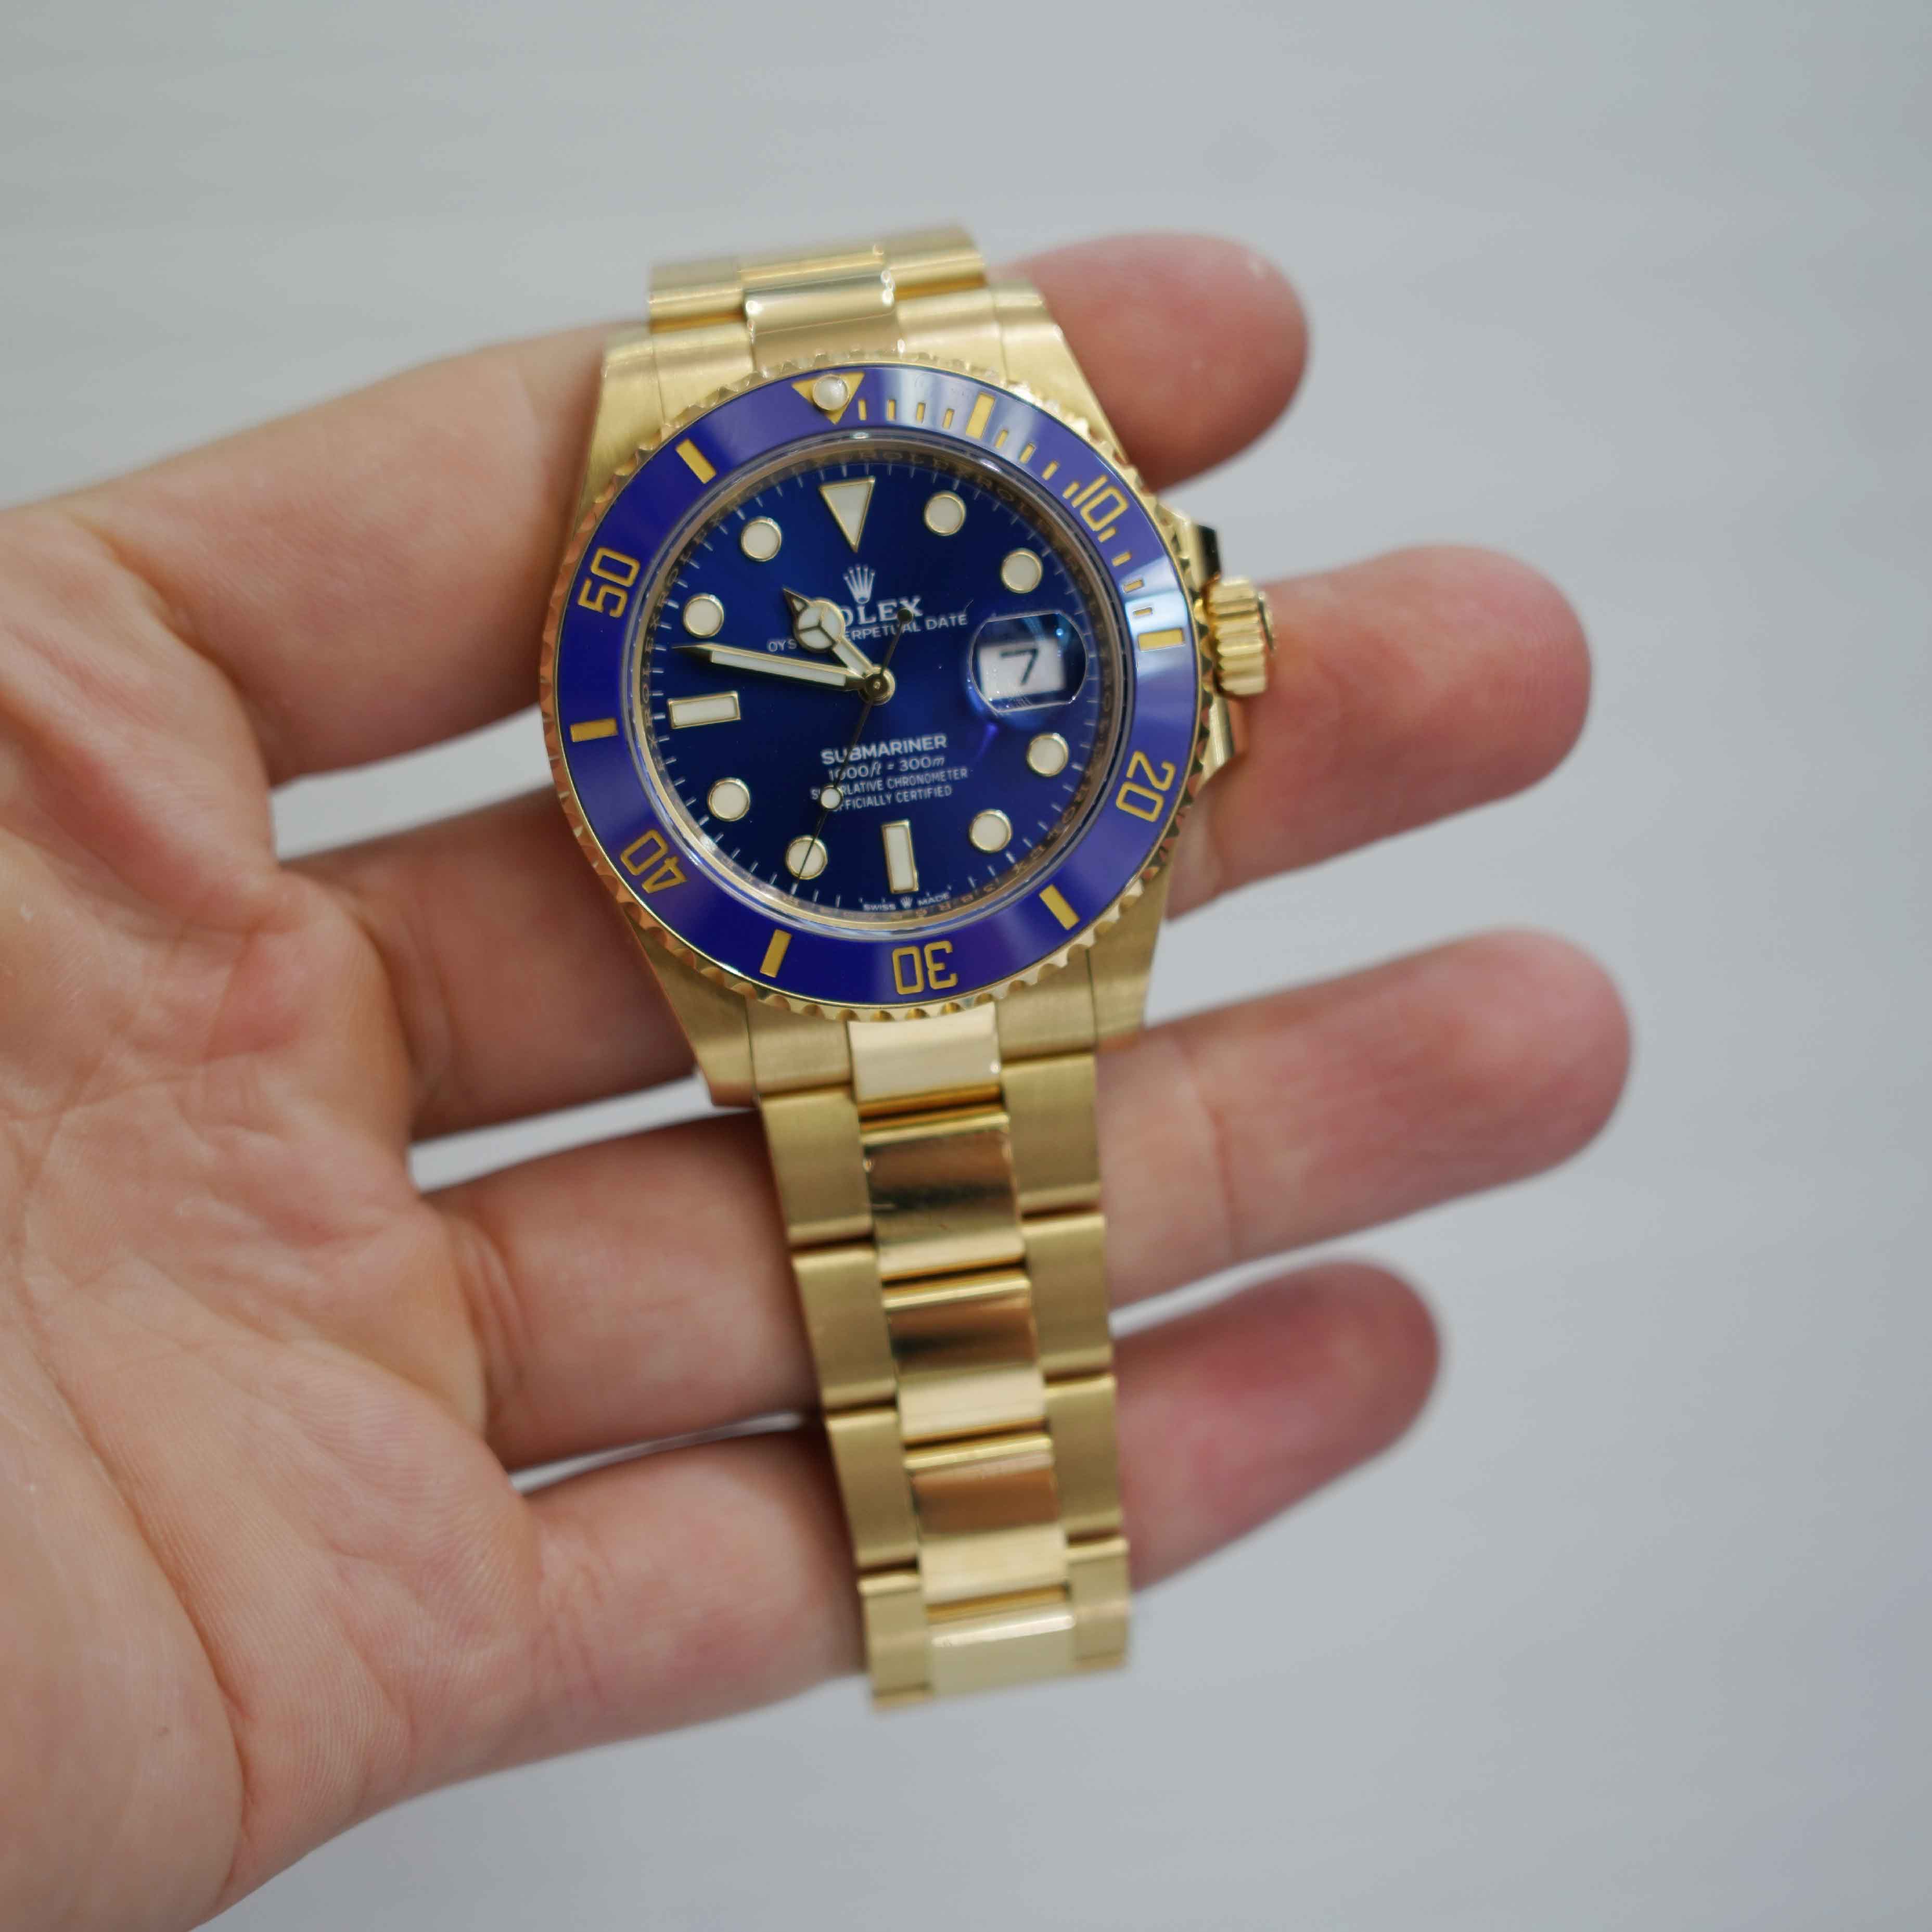 Rolex Submariner Watch 41 mm Blue Dial Solid 18K Yellow Gold Watch 126618LB